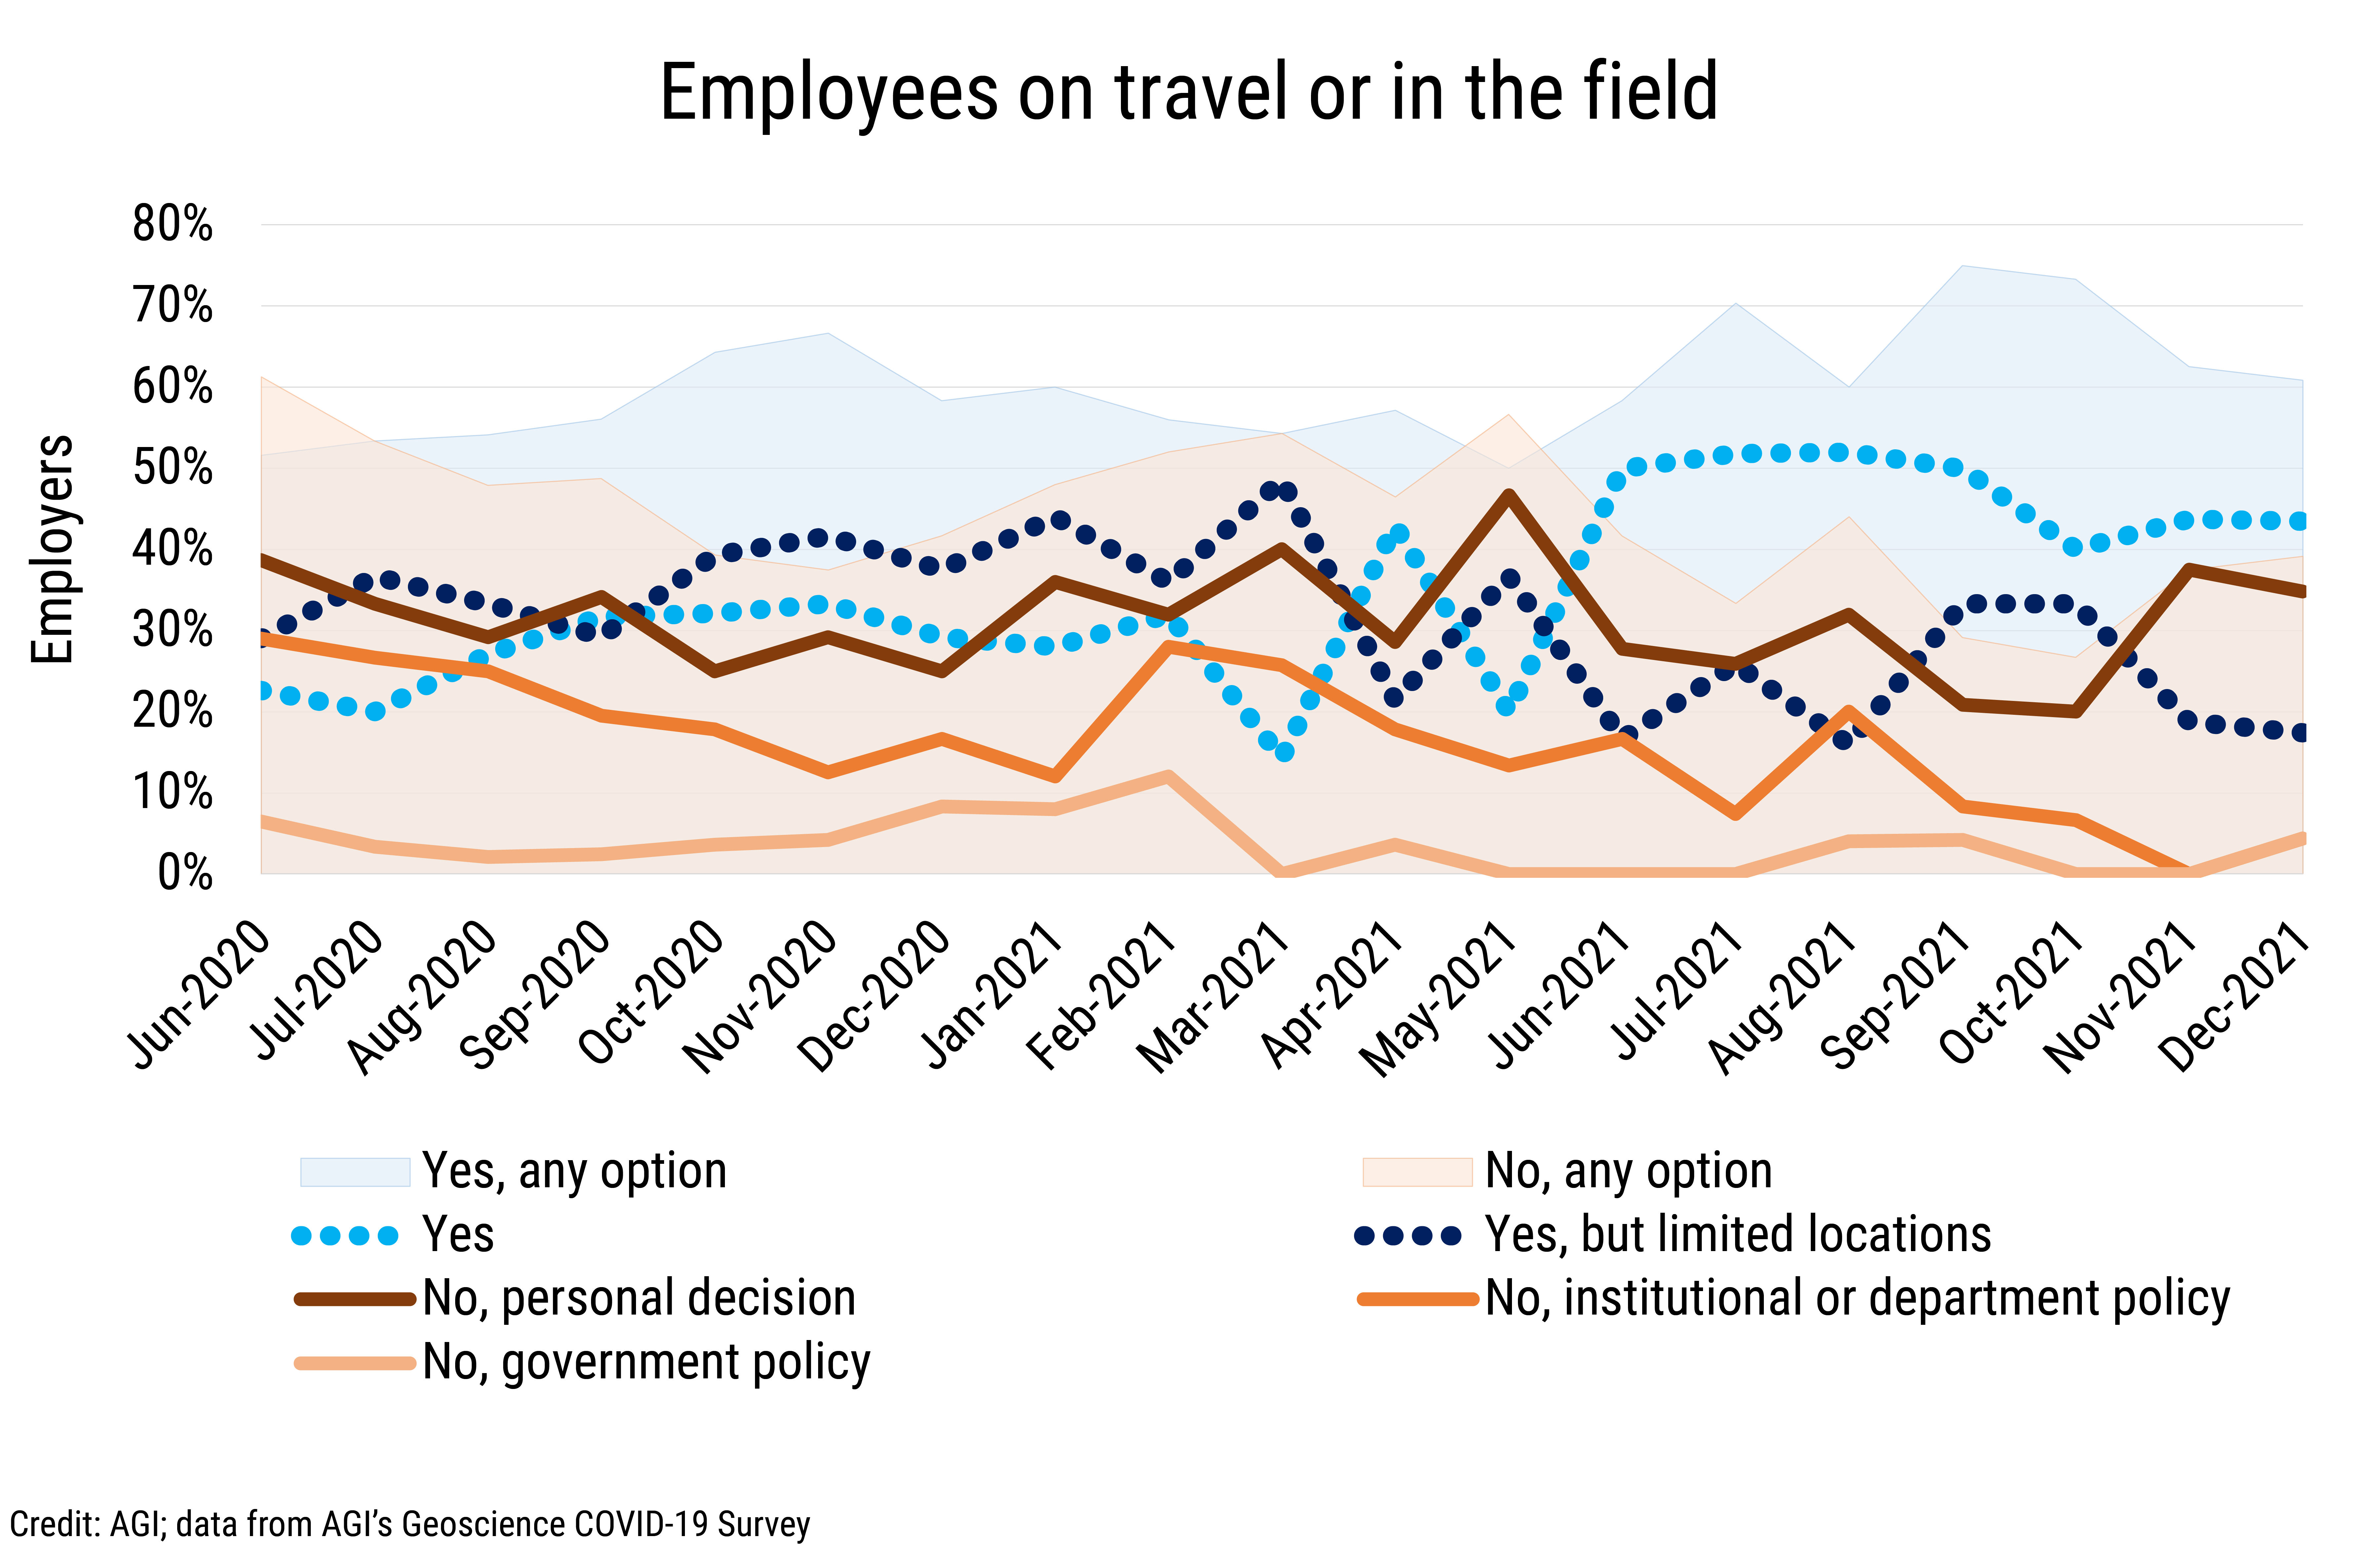 DB_2022-003 chart 04: Employees on travel or in the field (Credit: AGI; data from AGI's Geoscience COVID-19 Survey)